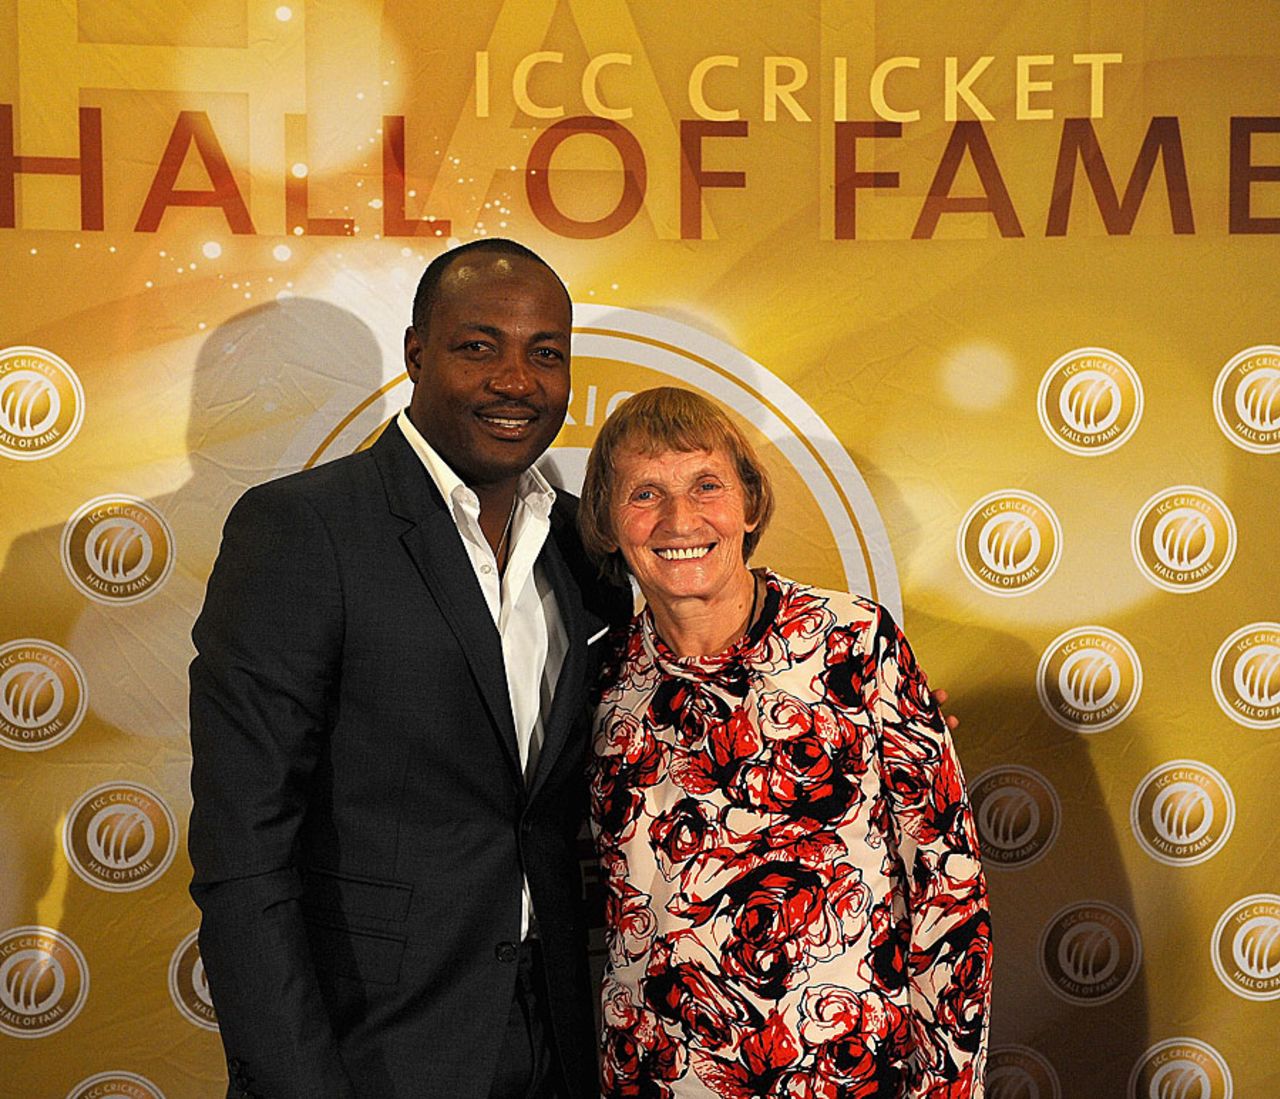 Brian Lara with Enid Bakewell of England, after the pair was inducted into the ICC's Cricket Hall of Fame, Colombo, September 14, 2012